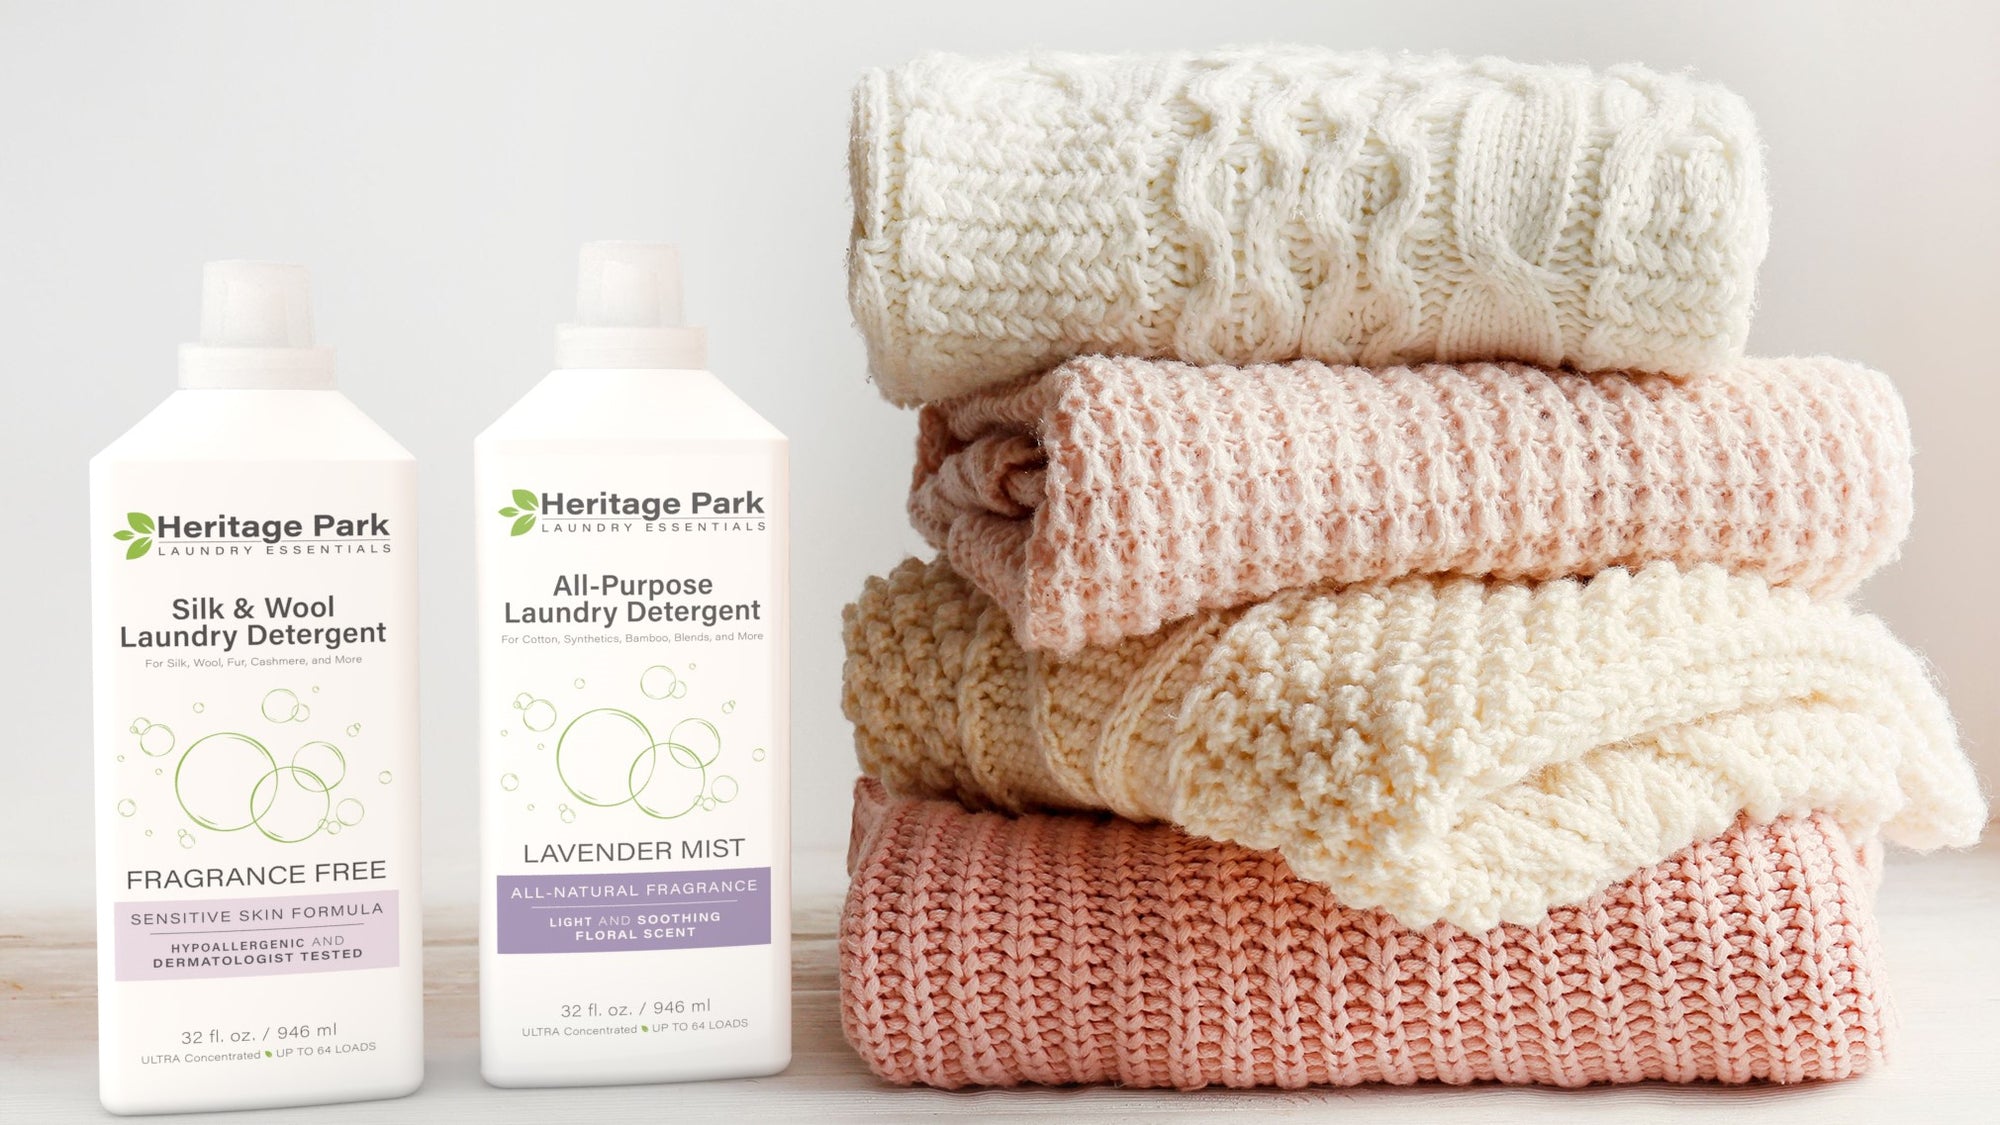 Fall Cleaning Checklist: Refresh Your Wardrobe and Home for Cooler Temperatures with Heritage Park Laundry Essentials